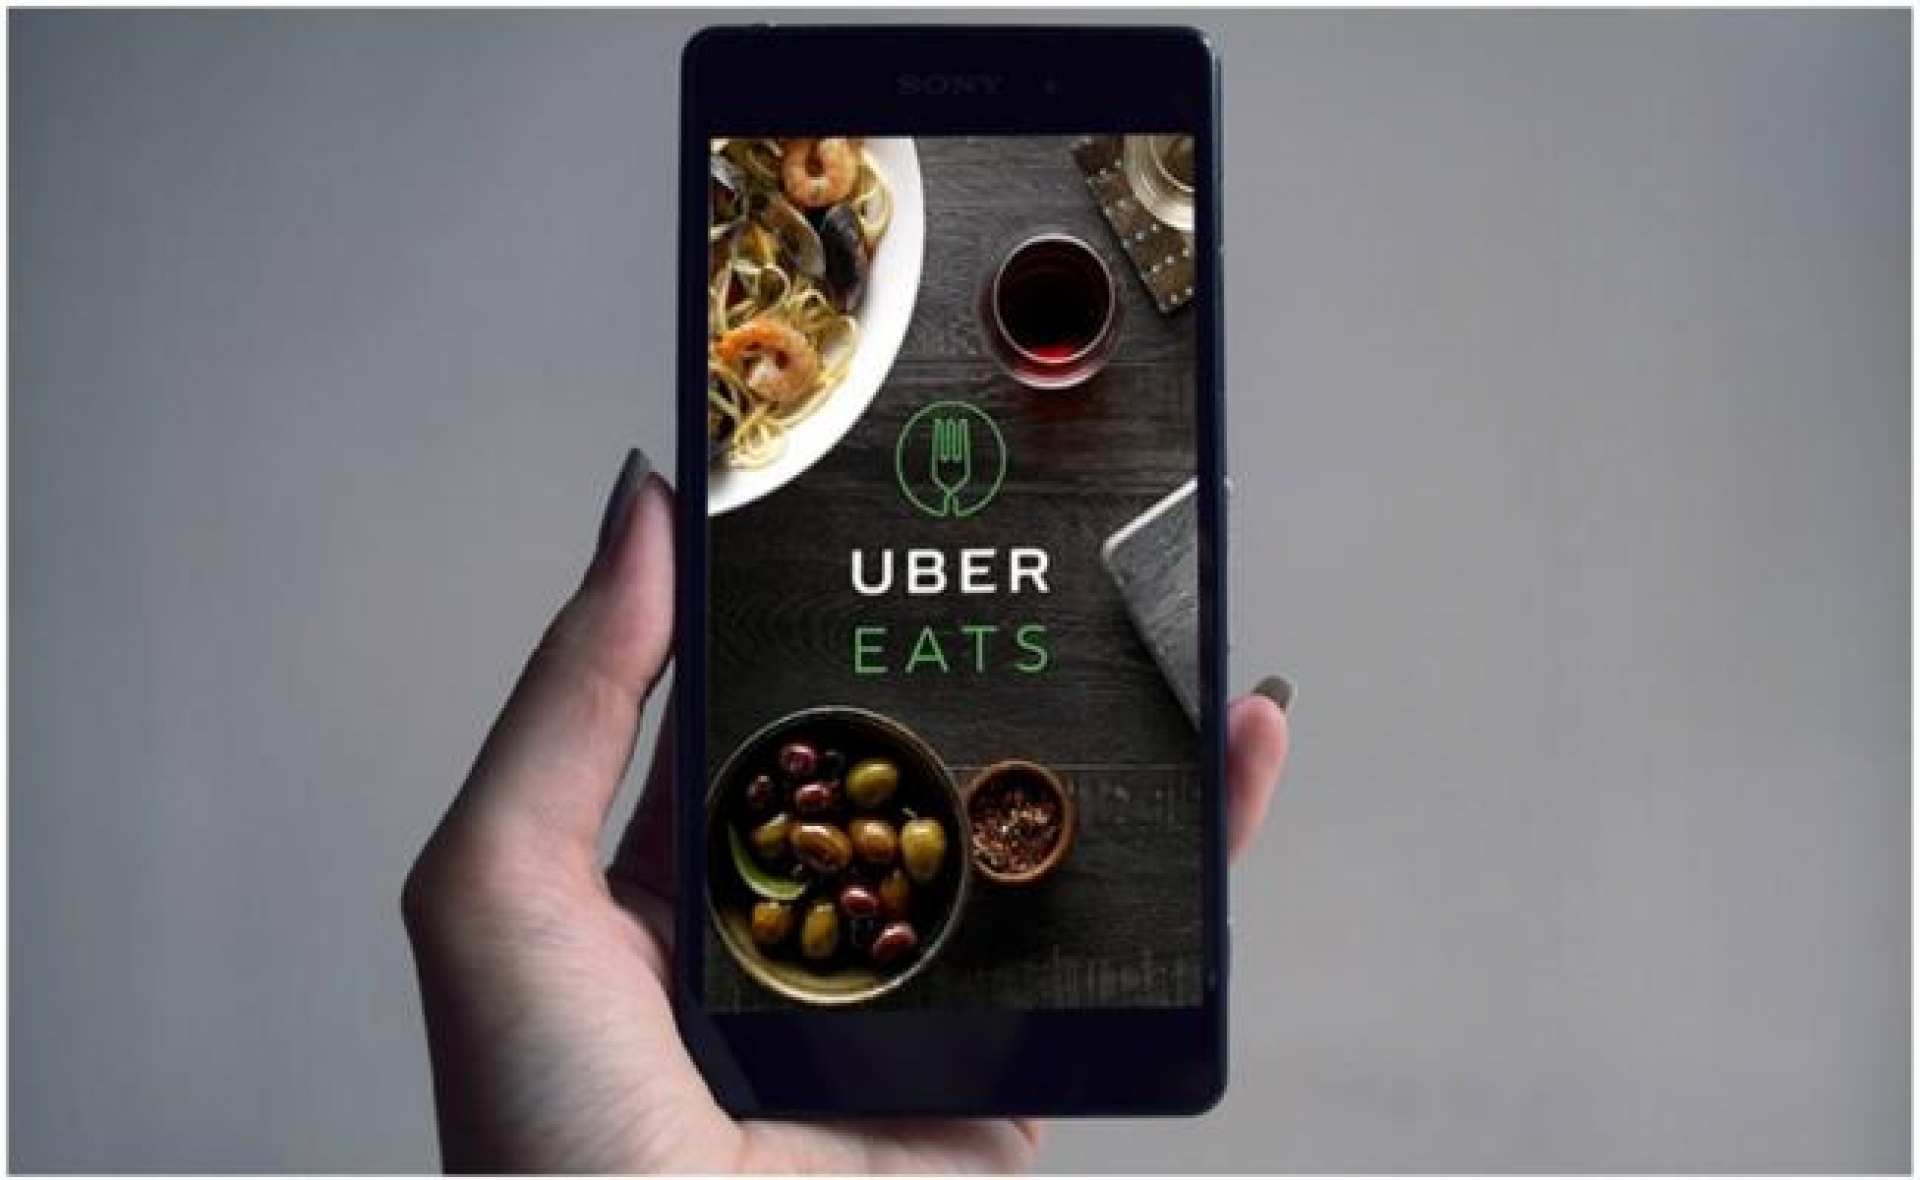 Uber Eats is adding an in-app donate button for restaurants